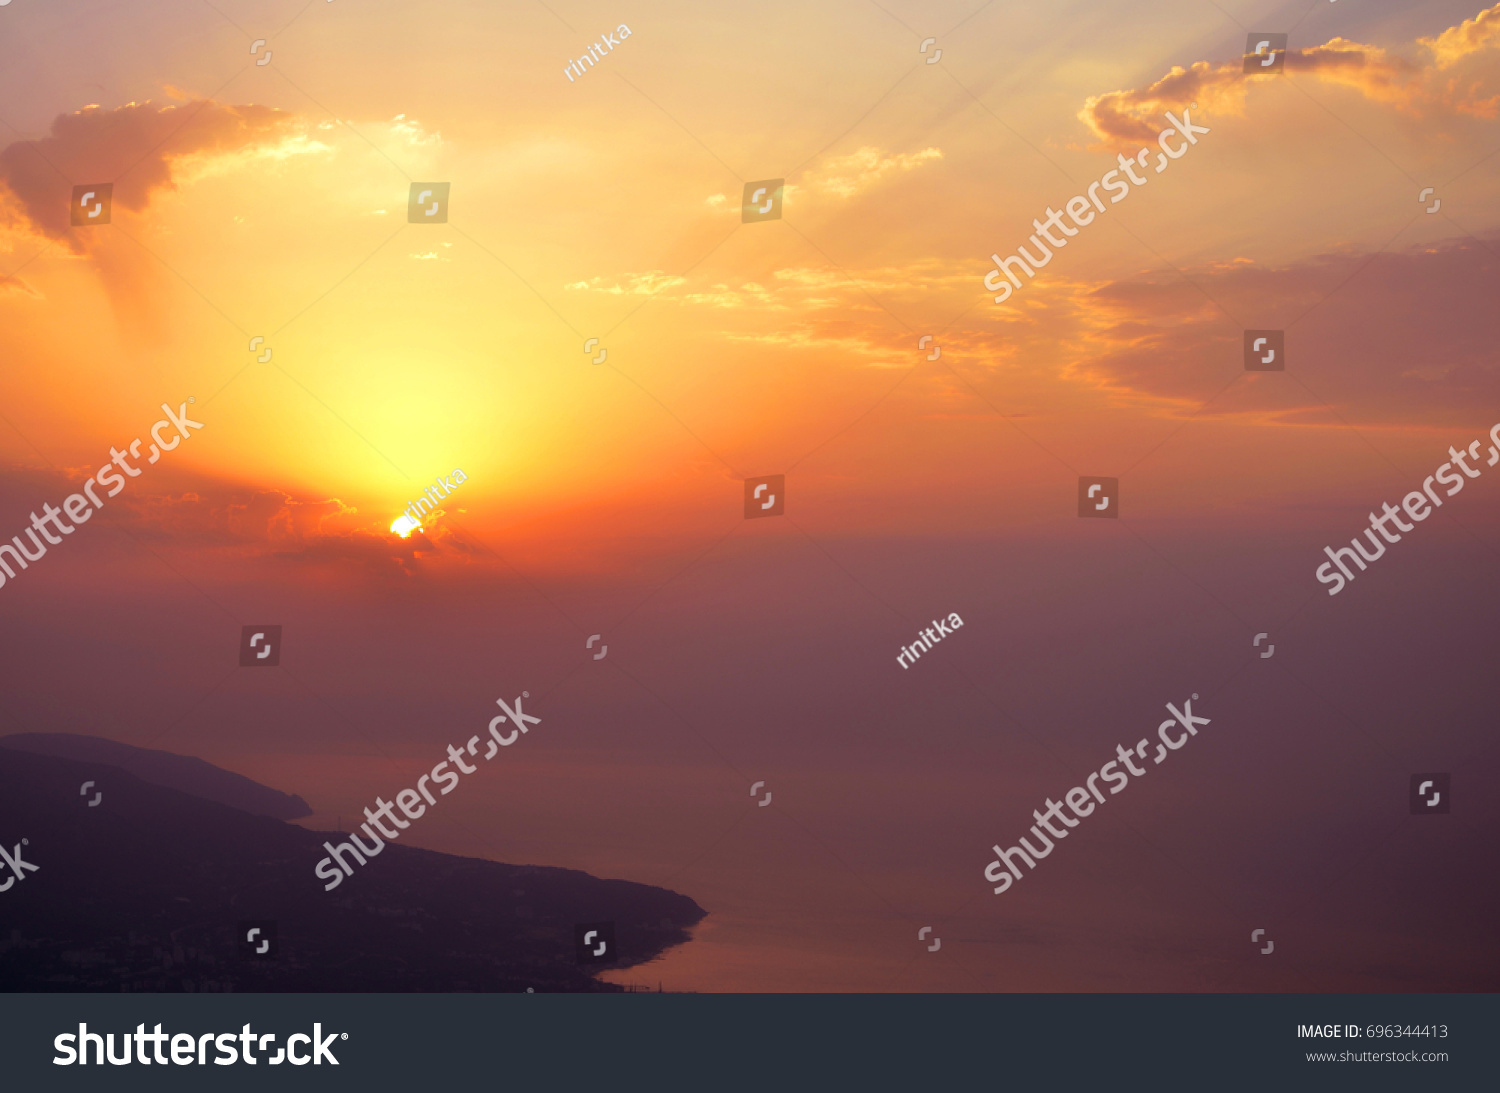 Background of sunrice im mountains in morning, Crimea, Ay Petry #696344413